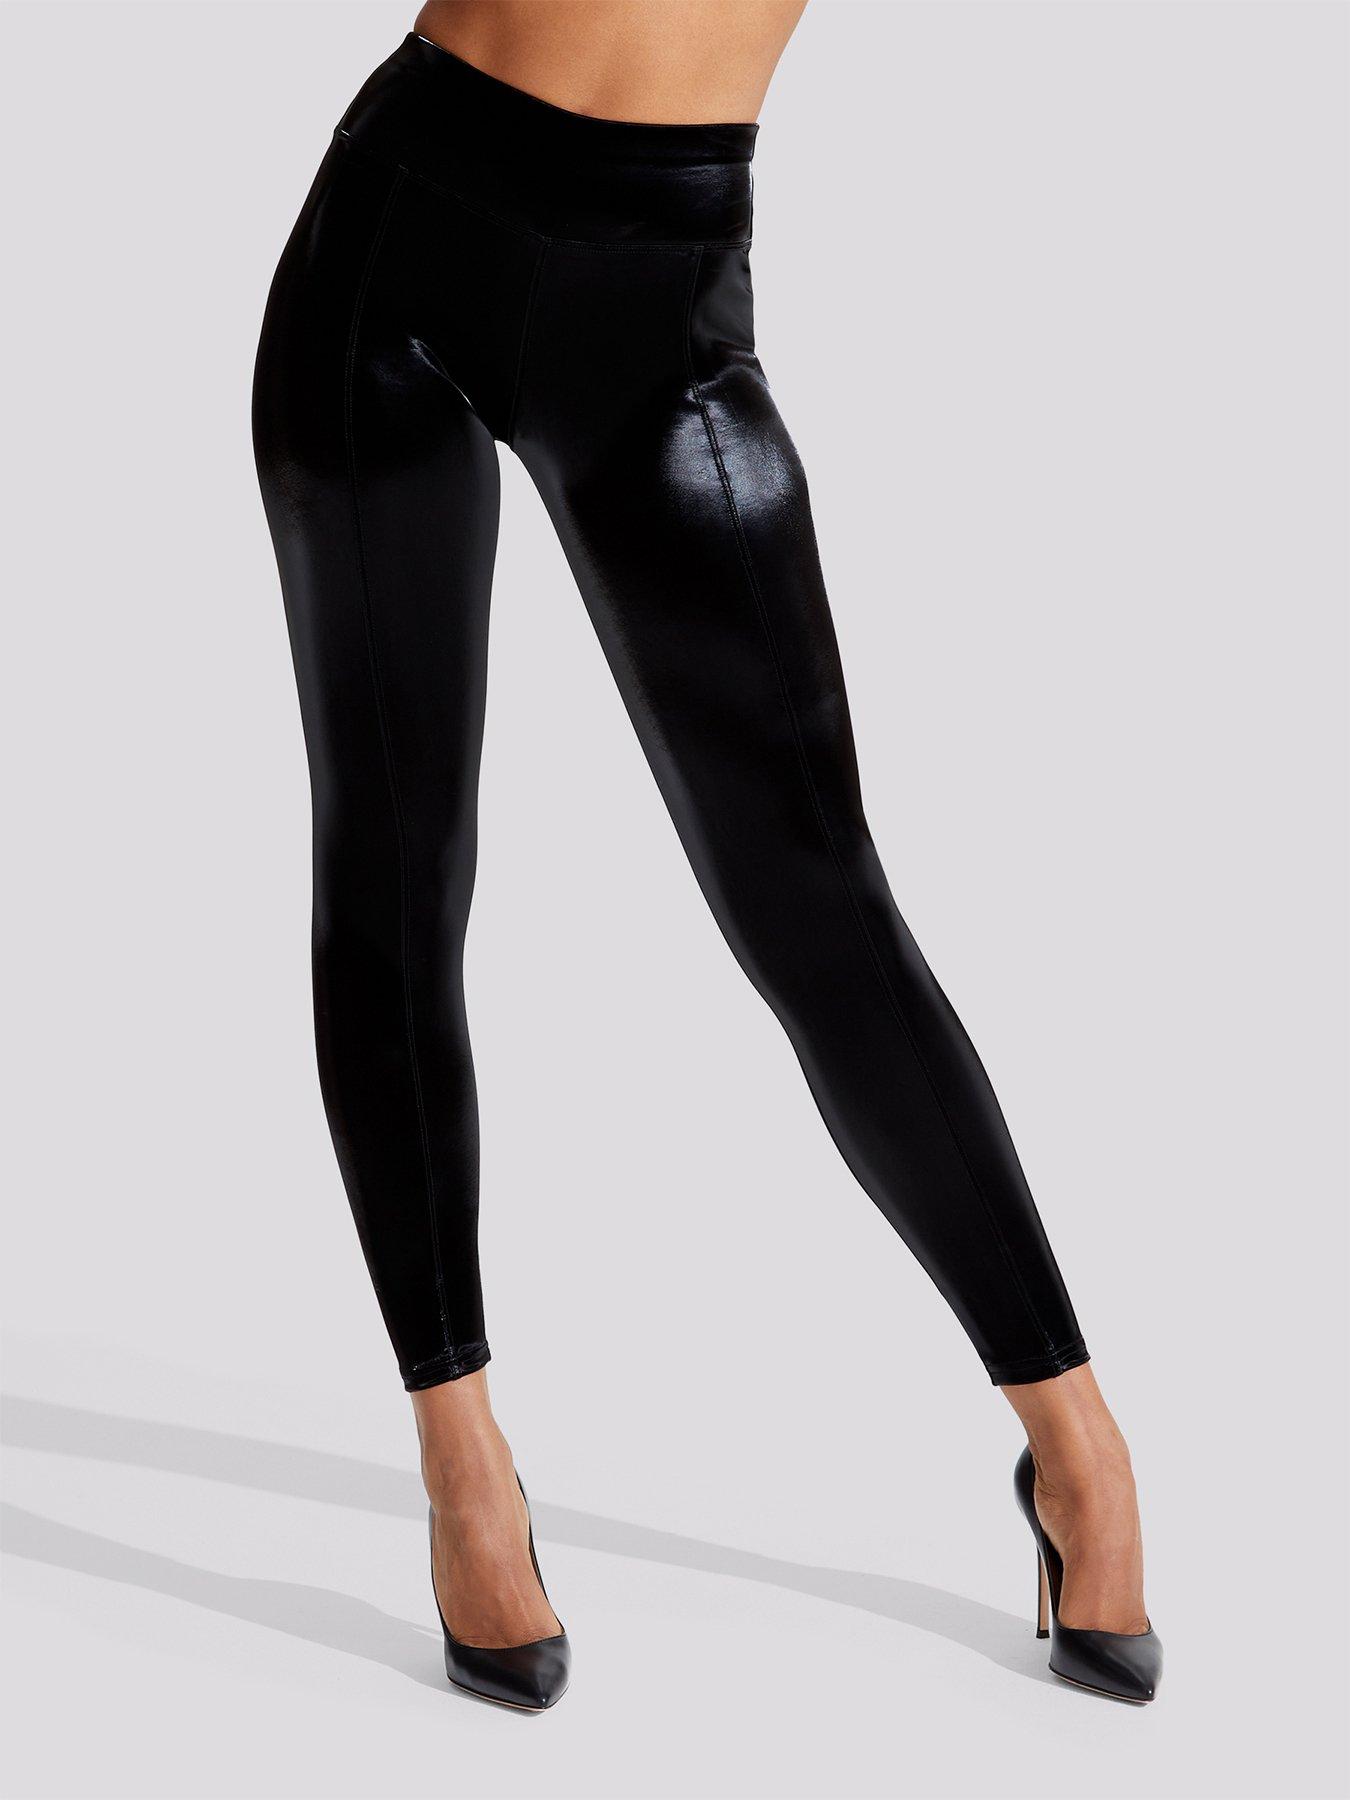 Buy Ann Summers Lucille Diamante Side Seam PU Black Leggings from the Next  UK online shop